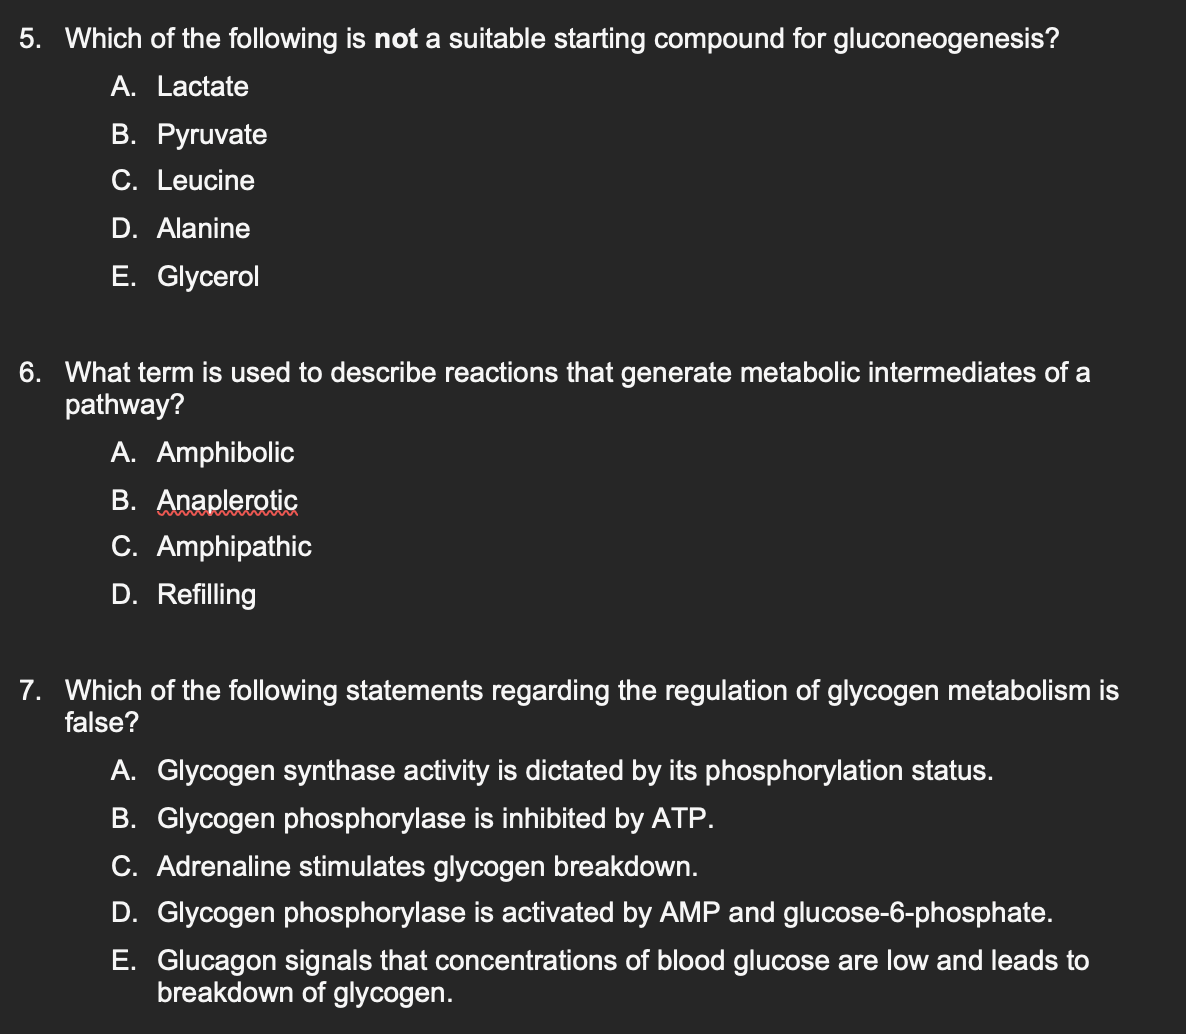 5. Which of the following is not a suitable starting compound for gluconeogenesis?
A. Lactate
B. Pyruvate
C. Leucine
D. Alanine
E. Glycerol
6. What term is used to describe reactions that generate metabolic intermediates of a
pathway?
A. Amphibolic
B. Anaplerotic
C. Amphipathic
D. Refilling
7. Which of the following statements regarding the regulation of glycogen metabolism is
false?
A. Glycogen synthase activity is dictated by its phosphorylation status.
B. Glycogen phosphorylase is inhibited by ATP.
C. Adrenaline stimulates glycogen breakdown.
D. Glycogen phosphorylase is activated by AMP and glucose-6-phosphate.
E. Glucagon signals that concentrations of blood glucose are low and leads to
breakdown of glycogen.